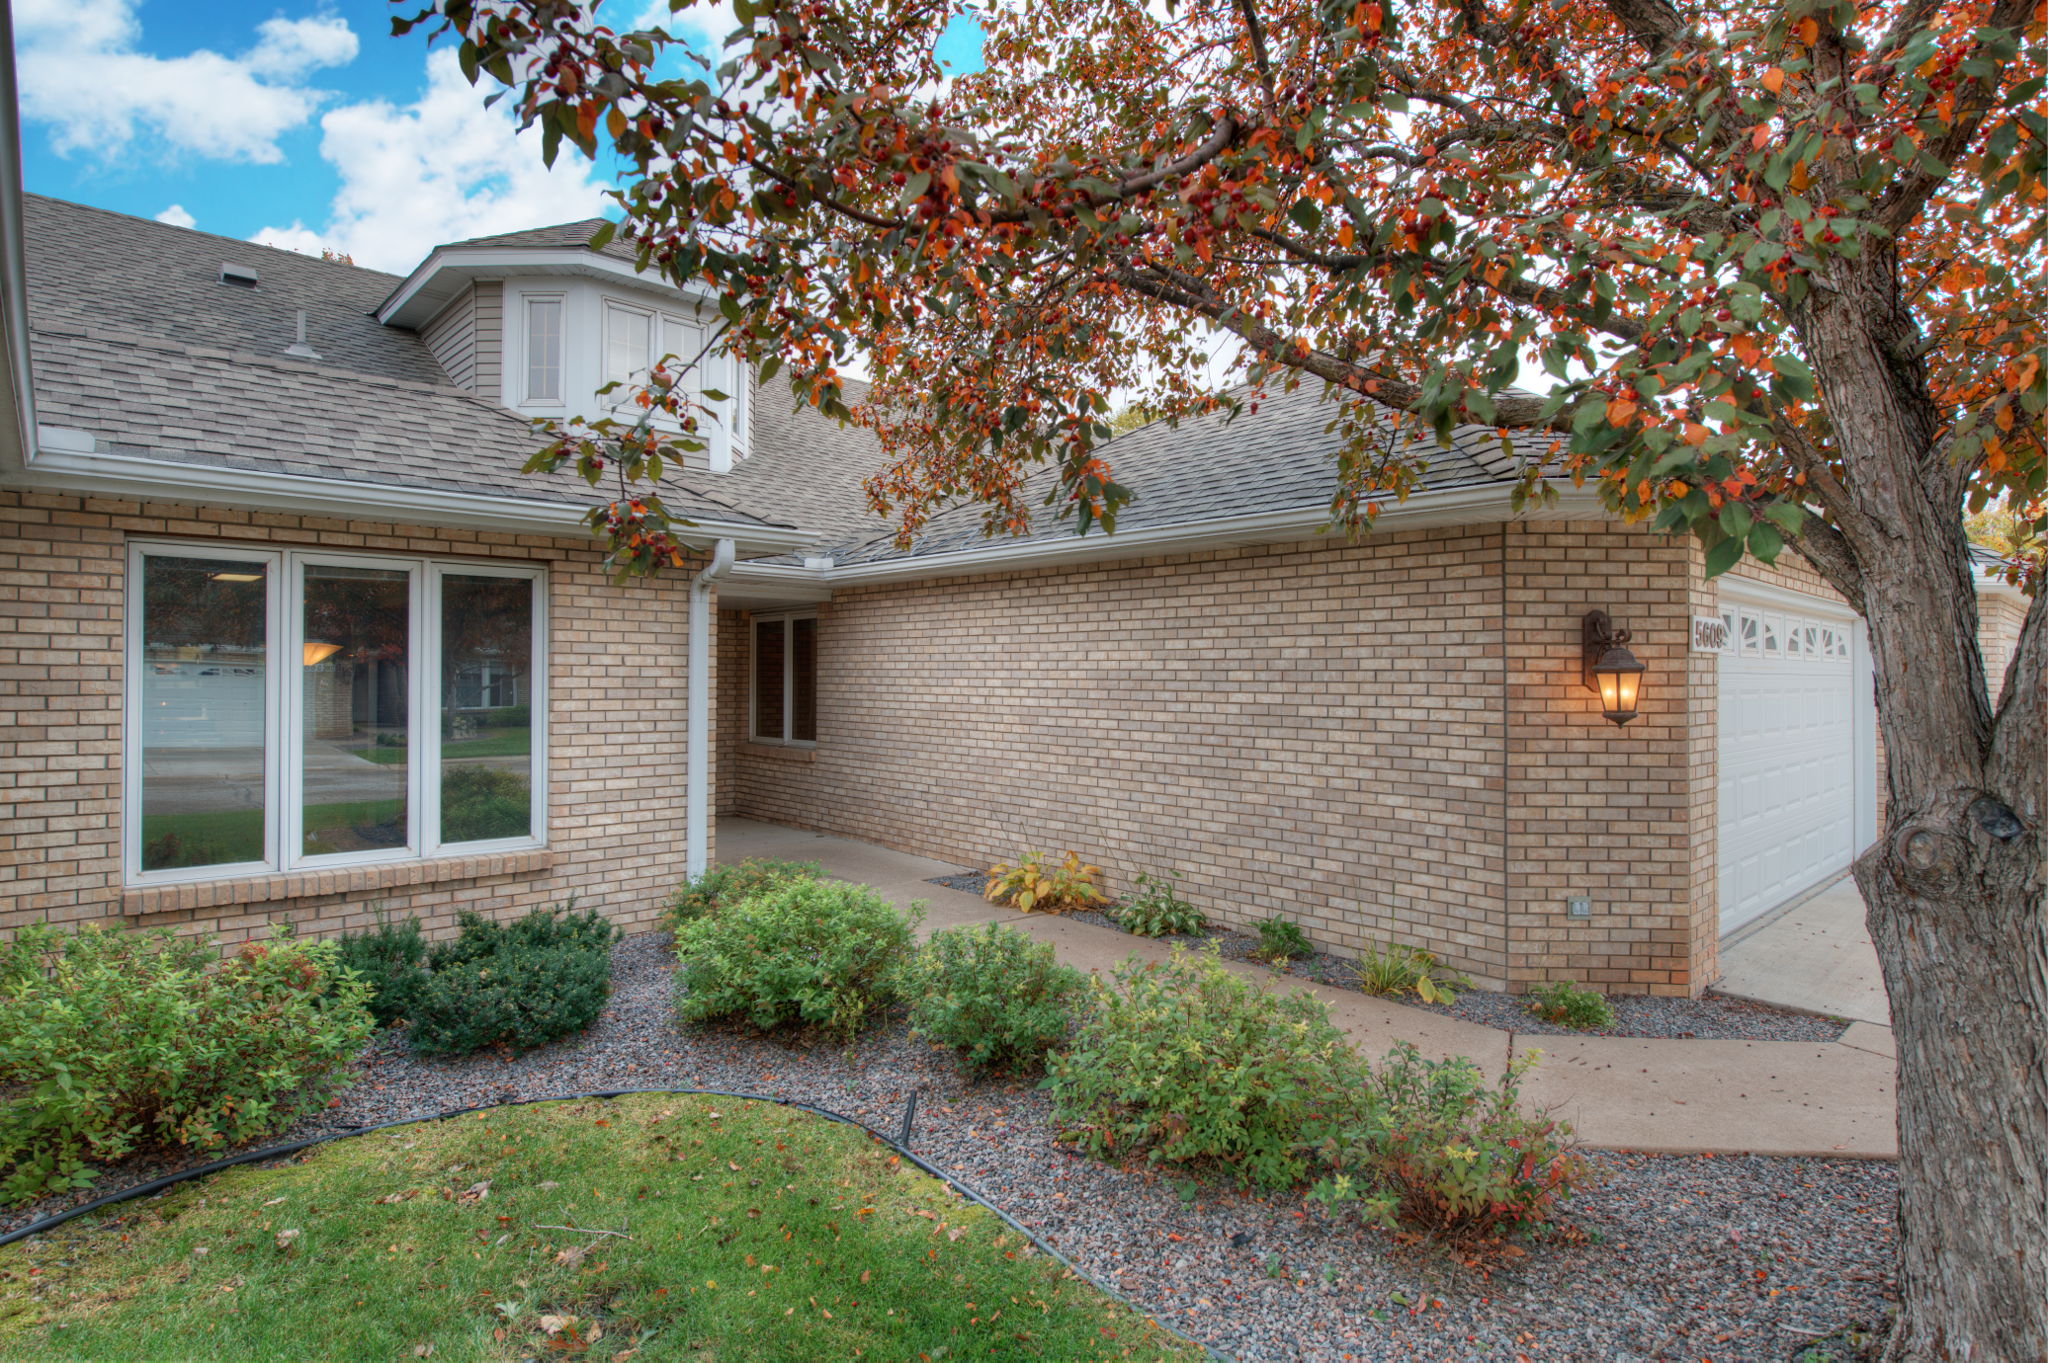  5609 Dunlap Ave North, Shoreview, MN 55126, US